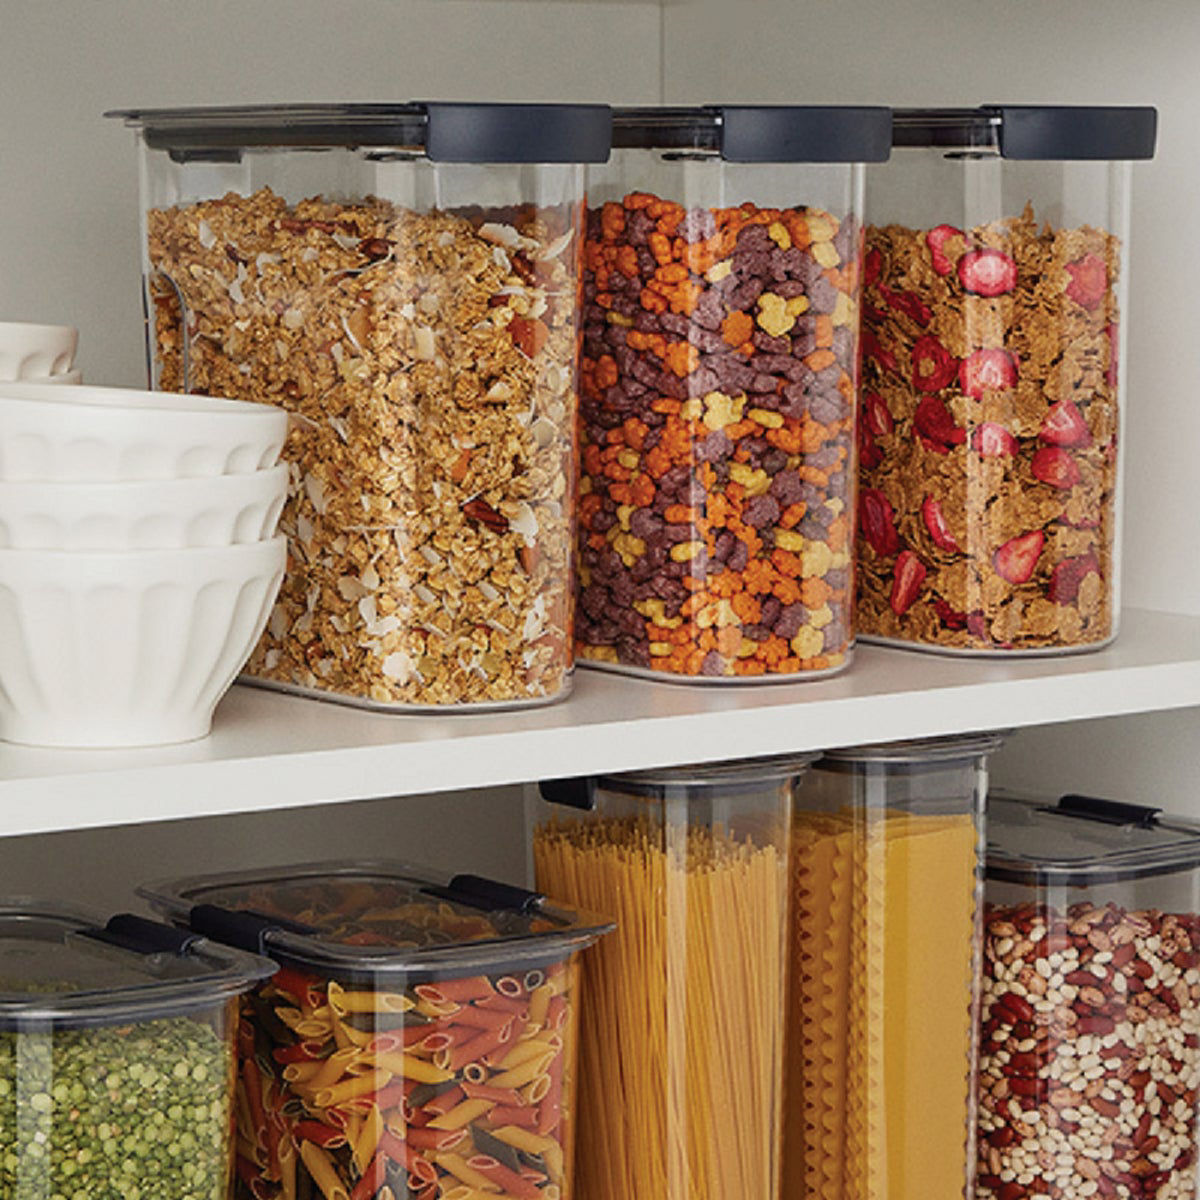 Rubbermaid Brilliance Pantry 18 Cup Cereal Keeper : Target